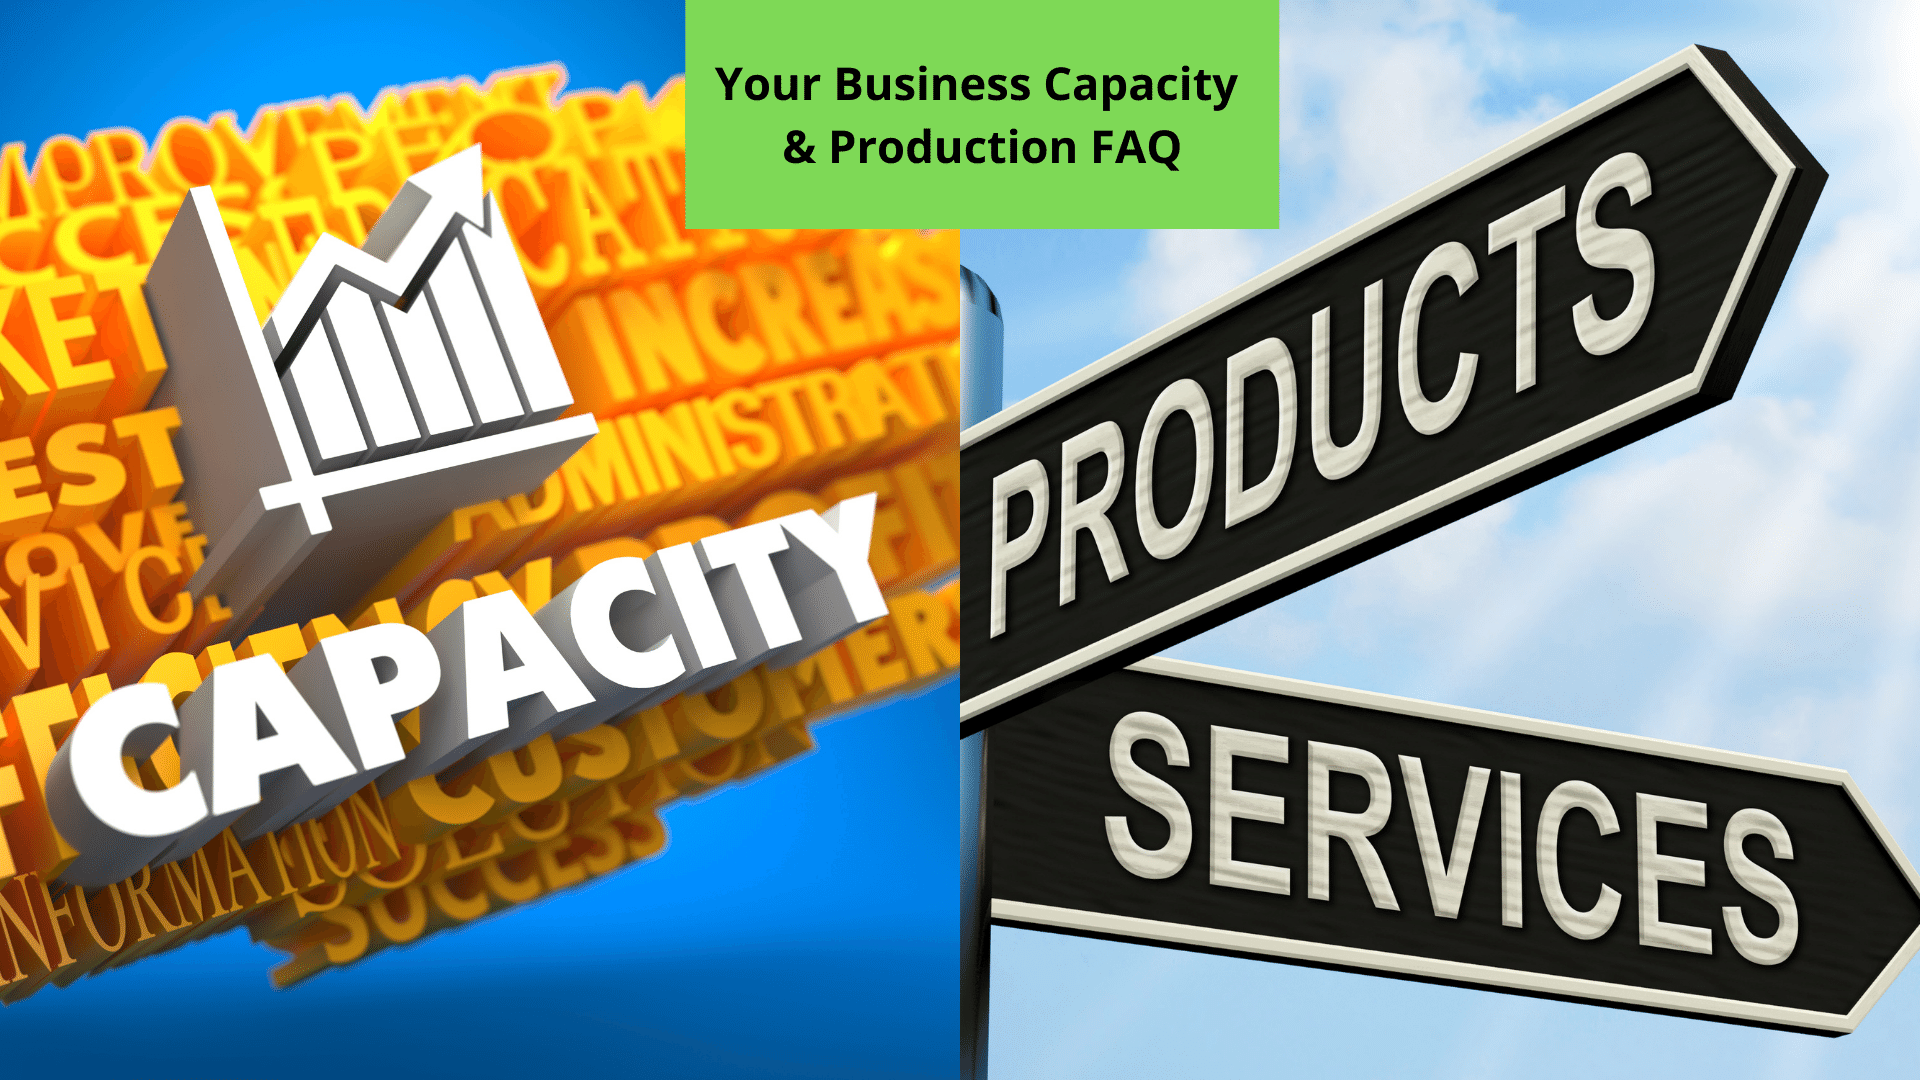 Your business capacity and production FAQ